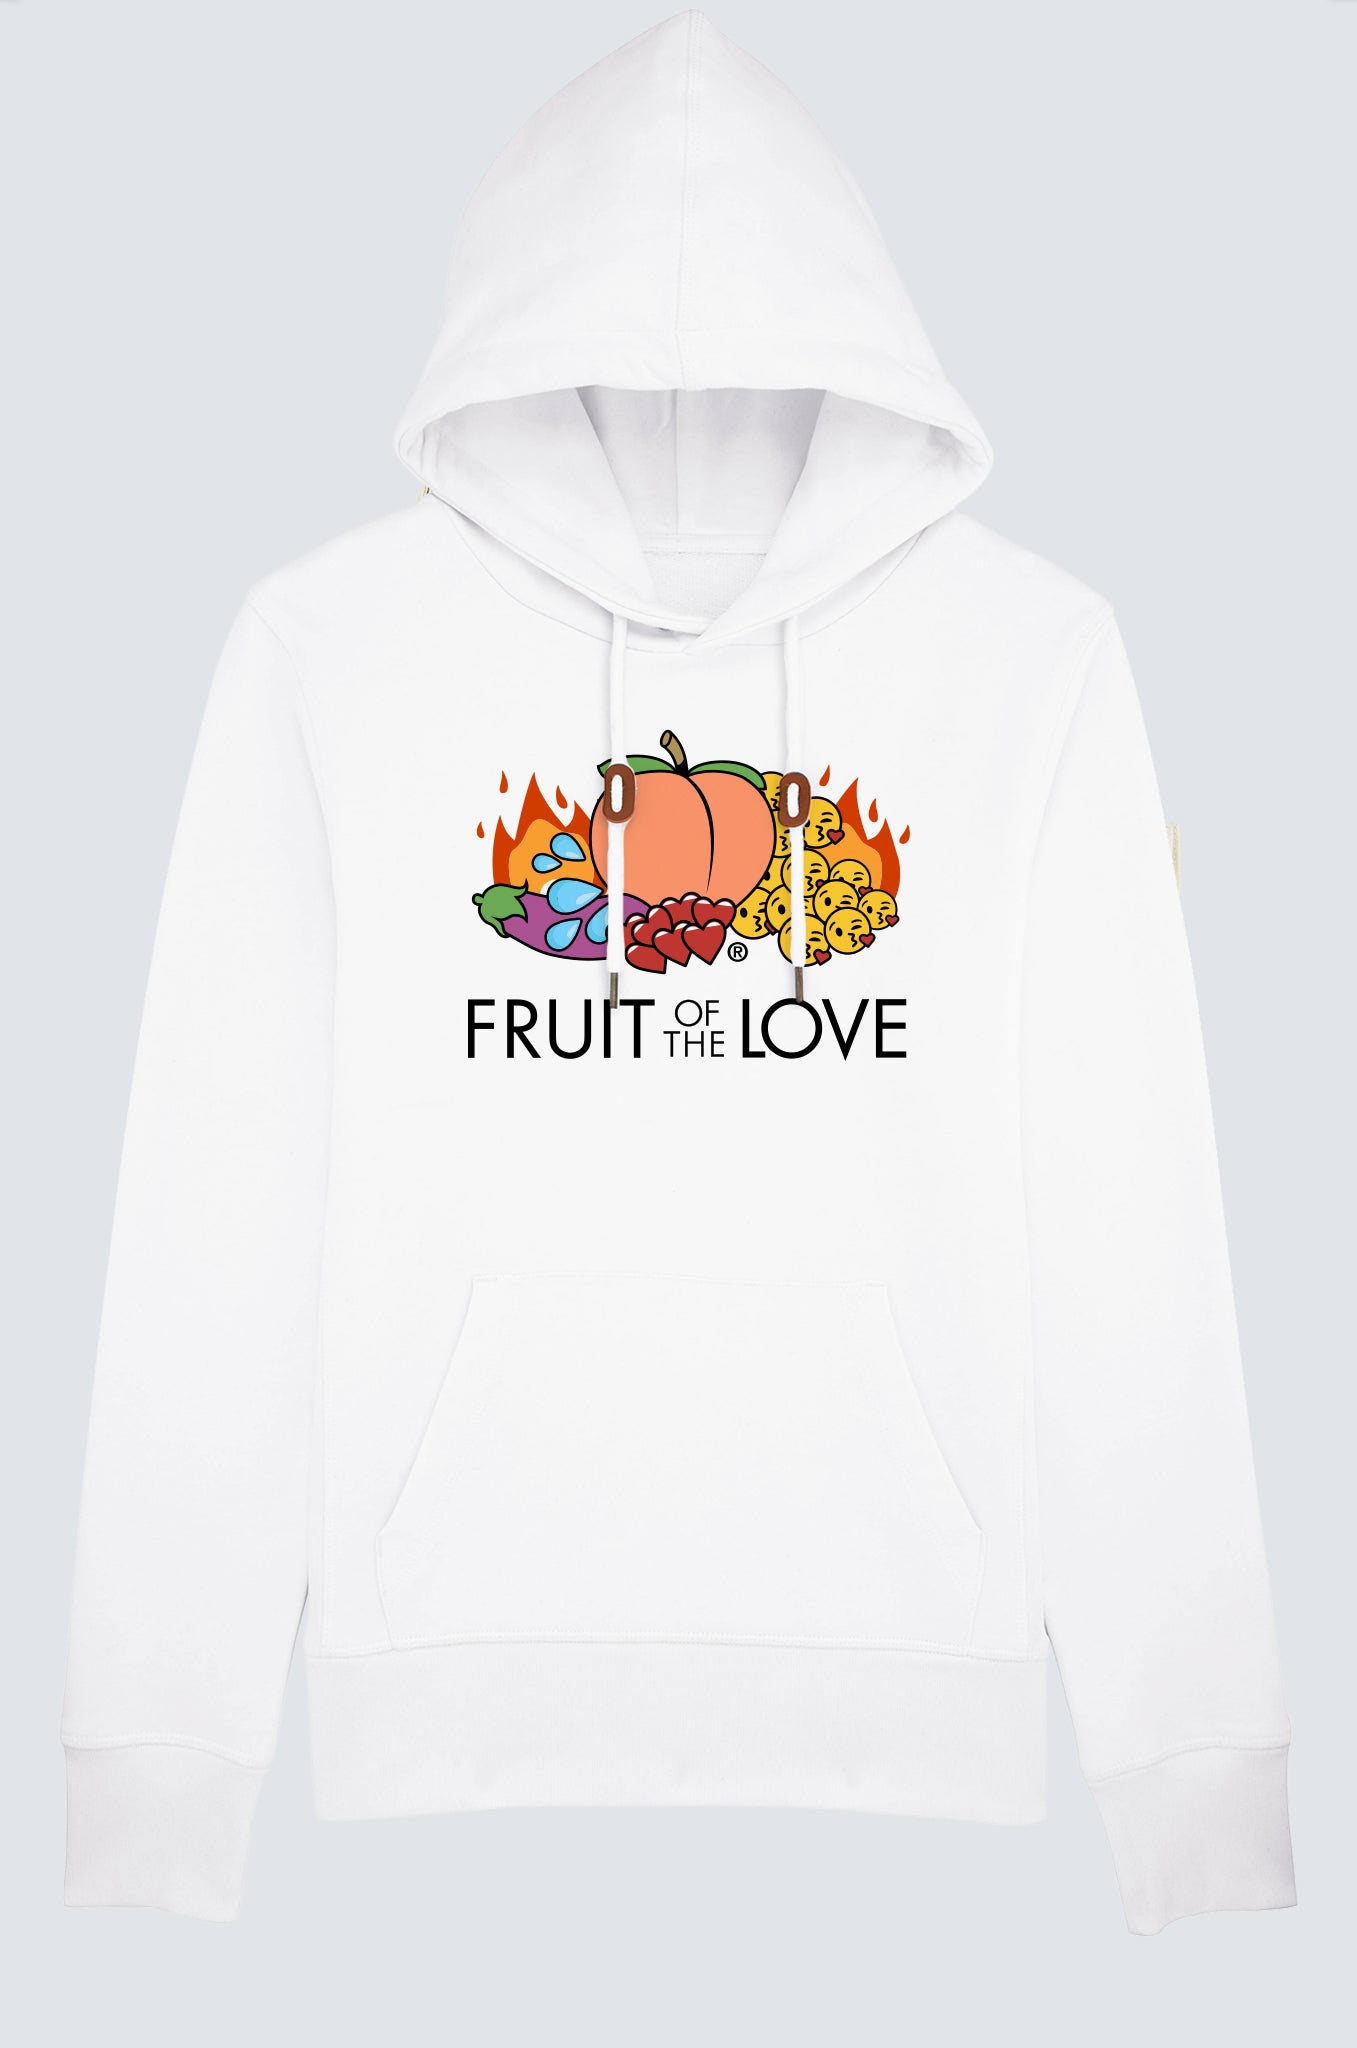 Fruit of the love